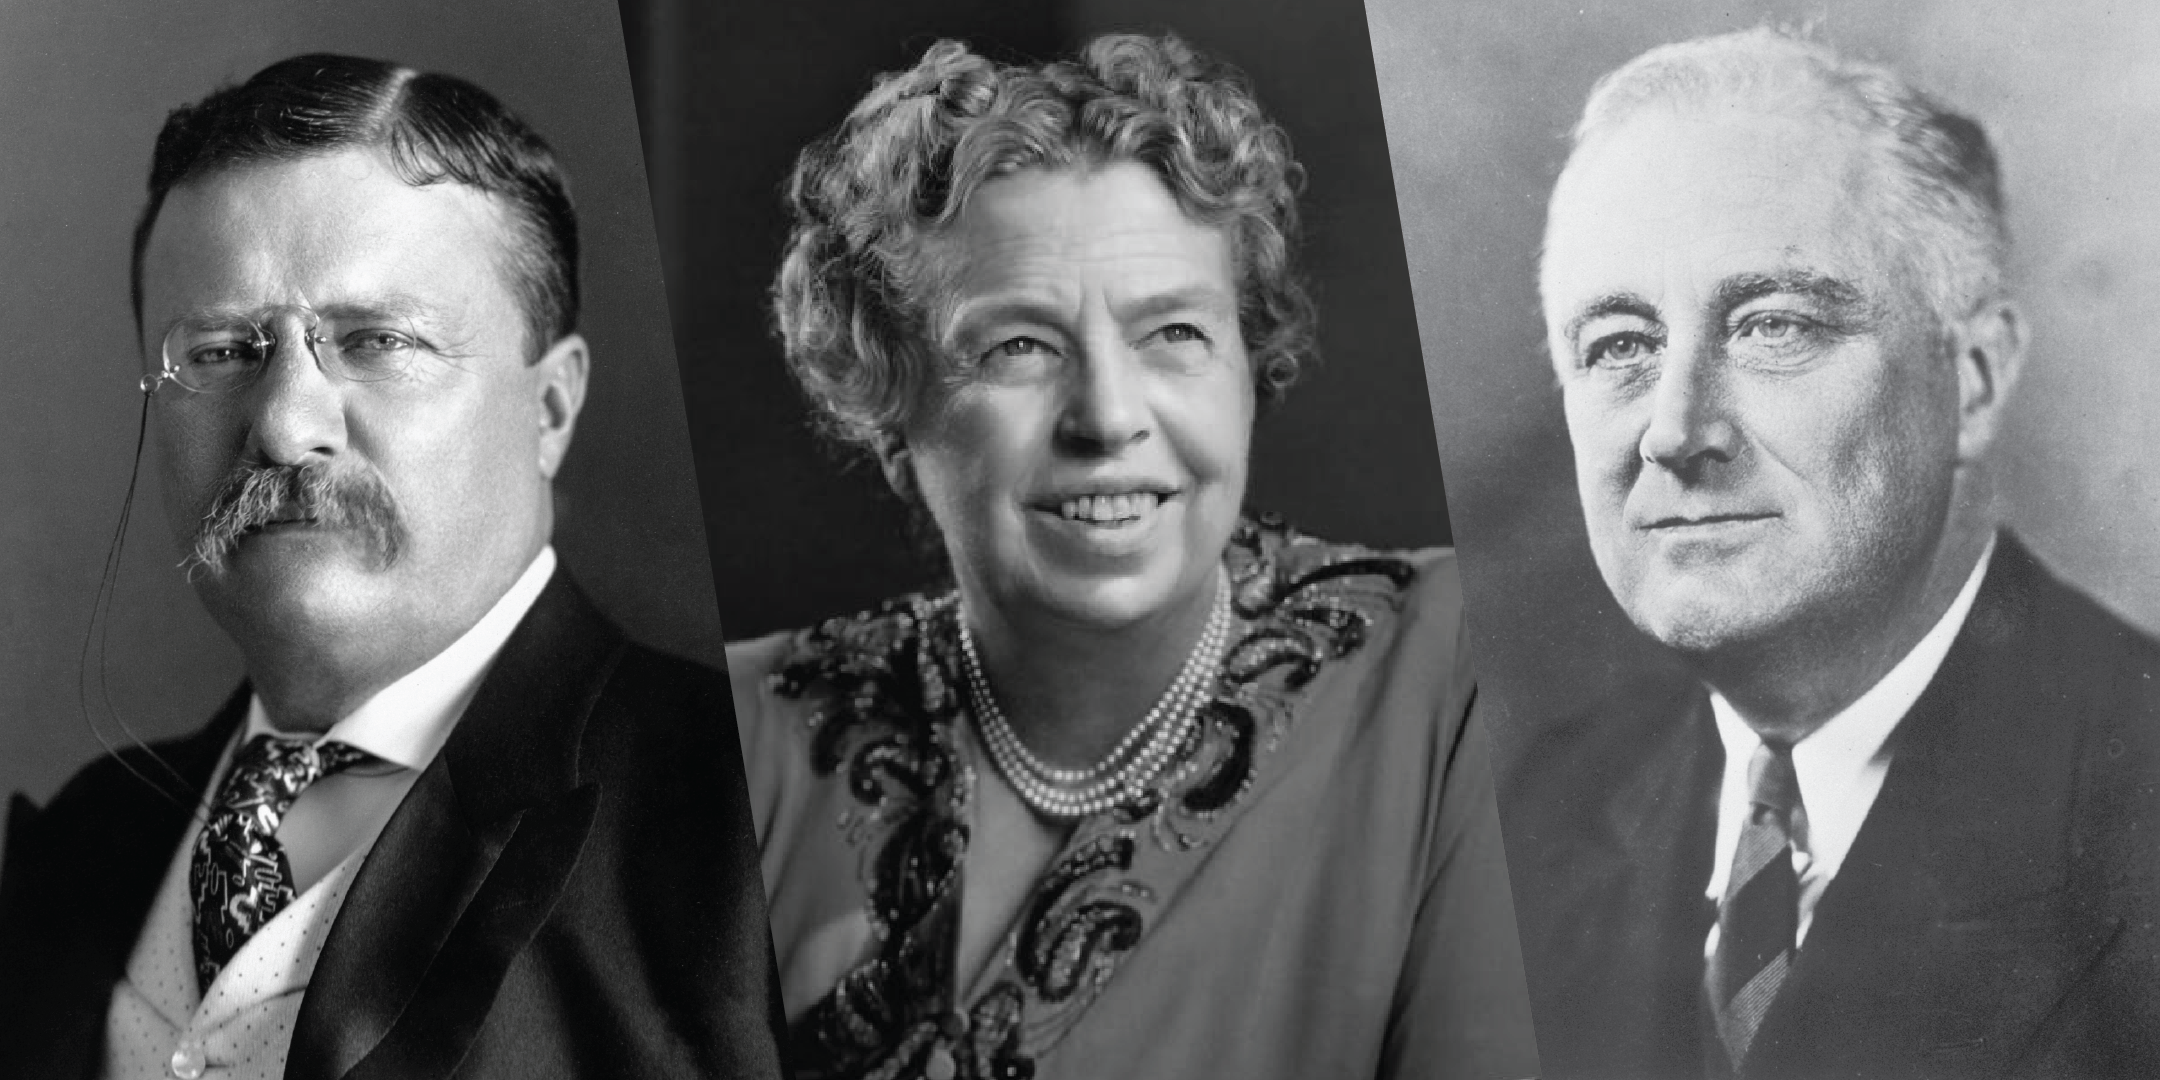 From left to right: portraits of Theodore Roosevelt, Elanor Roosevelt, and Franklin D. Roosevelt